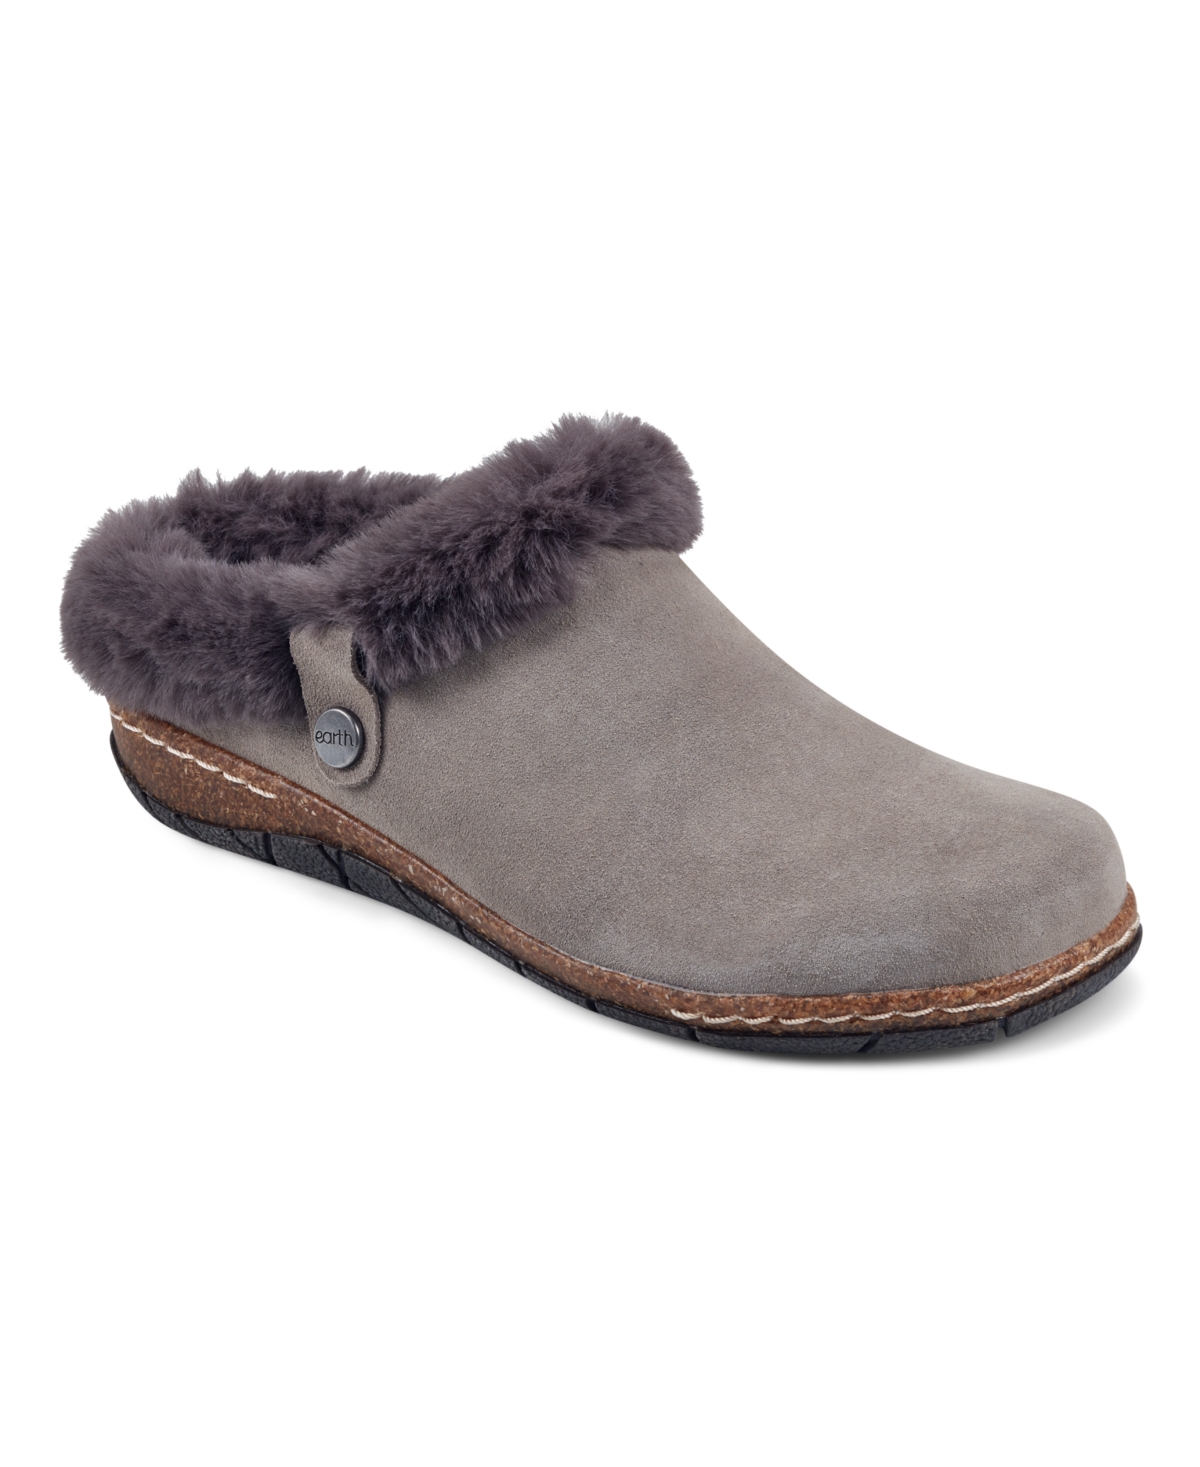 Earth Women's Elena Cold Weather Round Toe Casual Slip On Clogs In Gray Suede,faux Fur